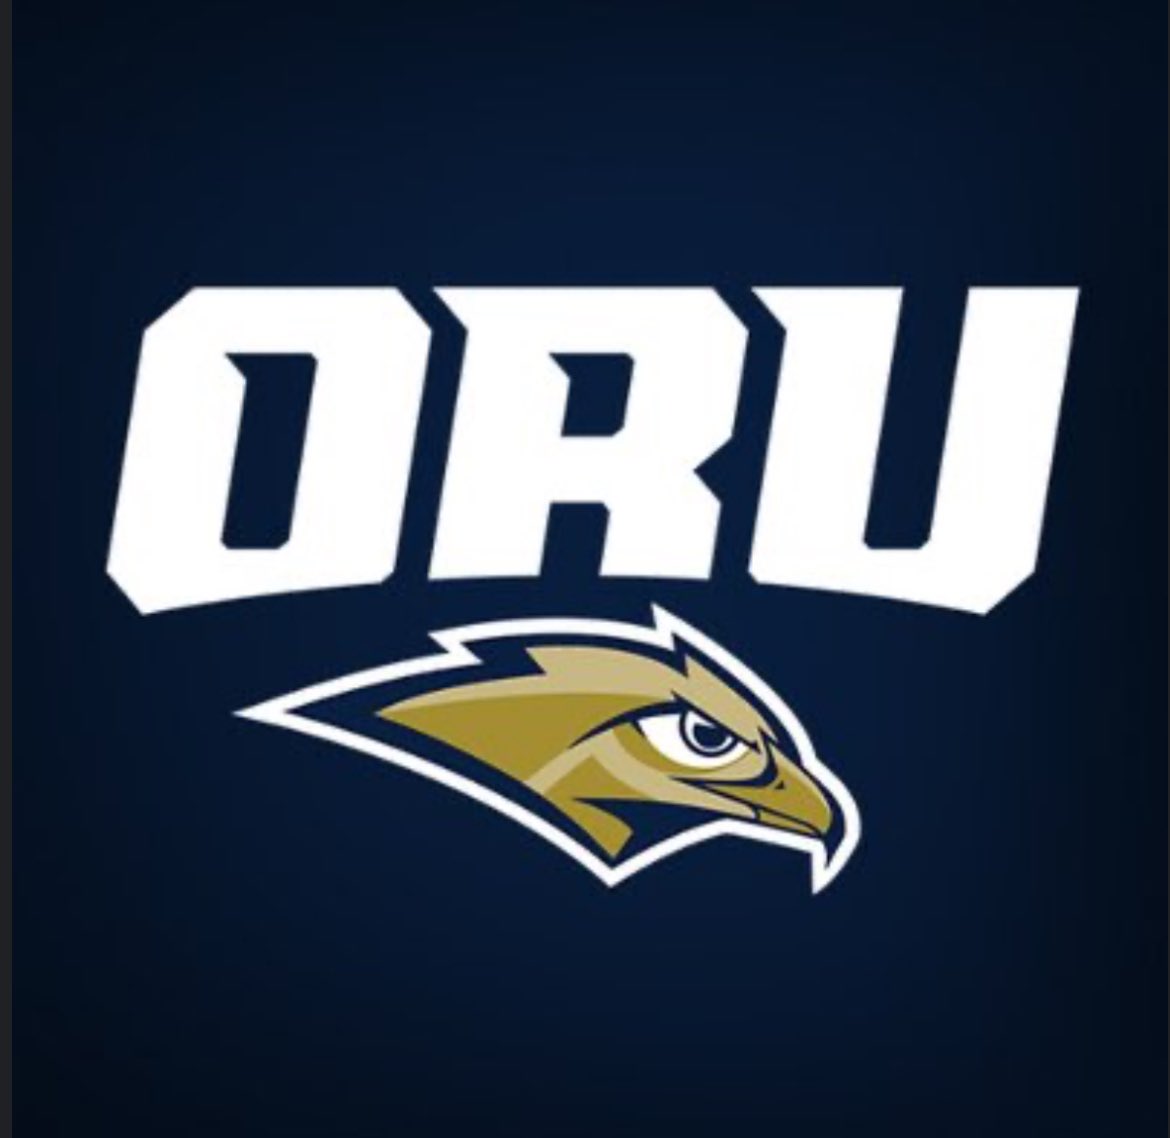 blessed to say i have received an offer from Oral Roberts University!